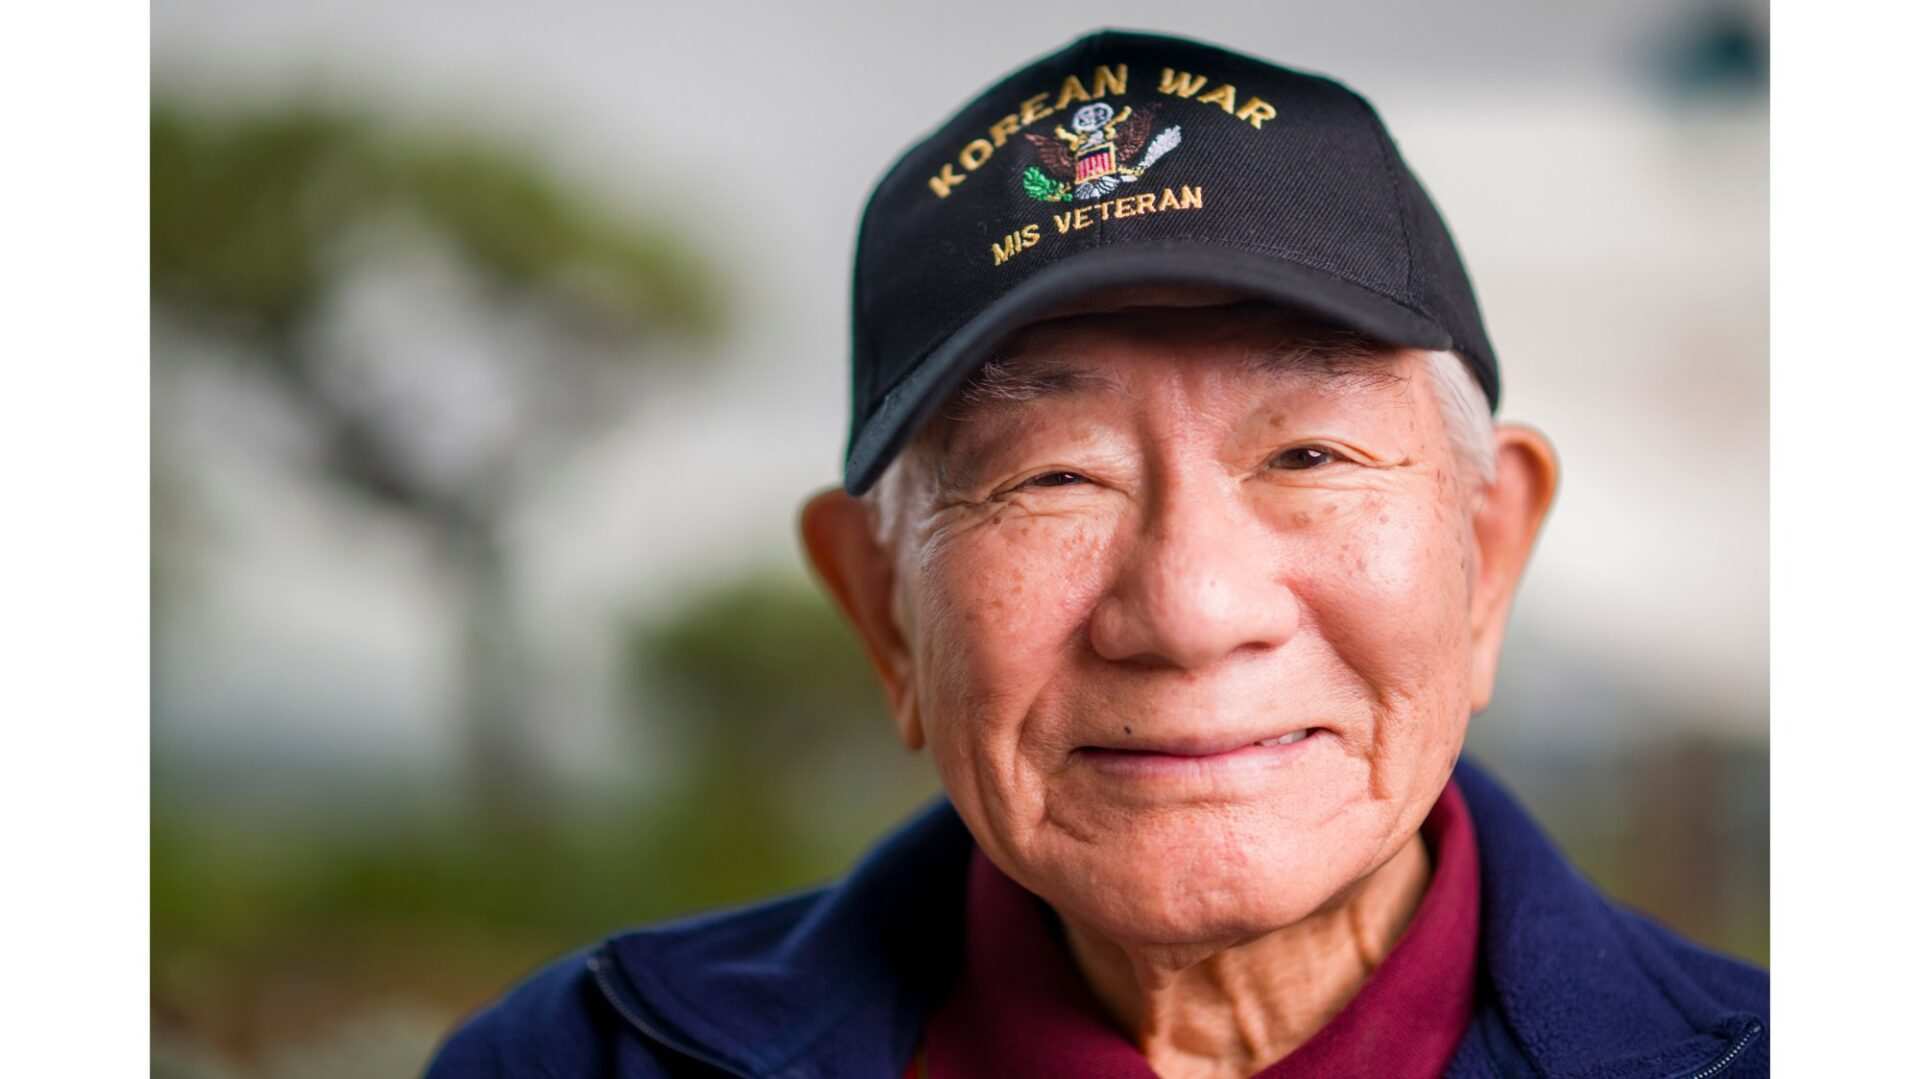 OC Korean War veteran, a Japanese American incarcerated as a child, donates collection to Smithsonian